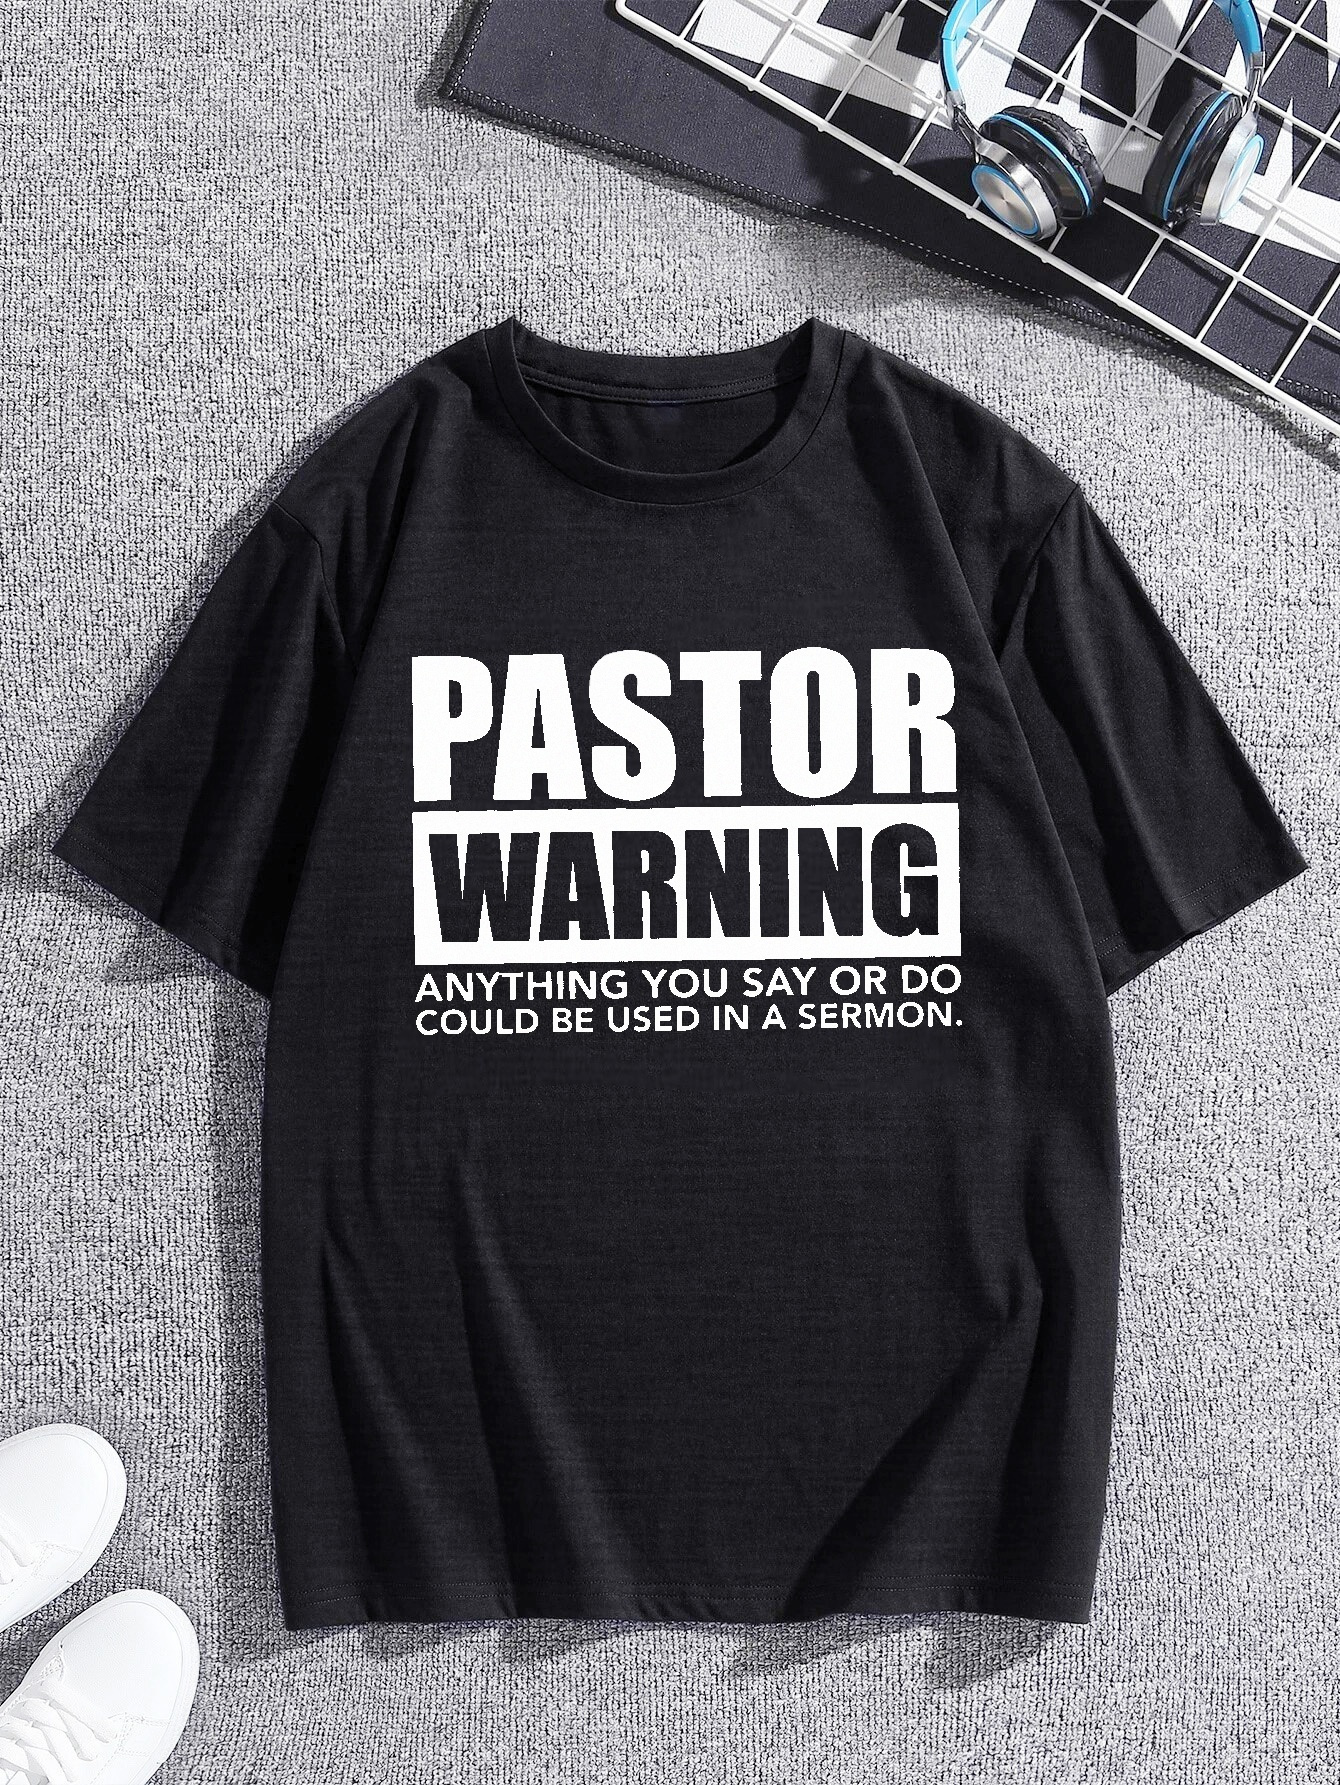  Pastor Warning Anything You Say Or Do Could Be Used in